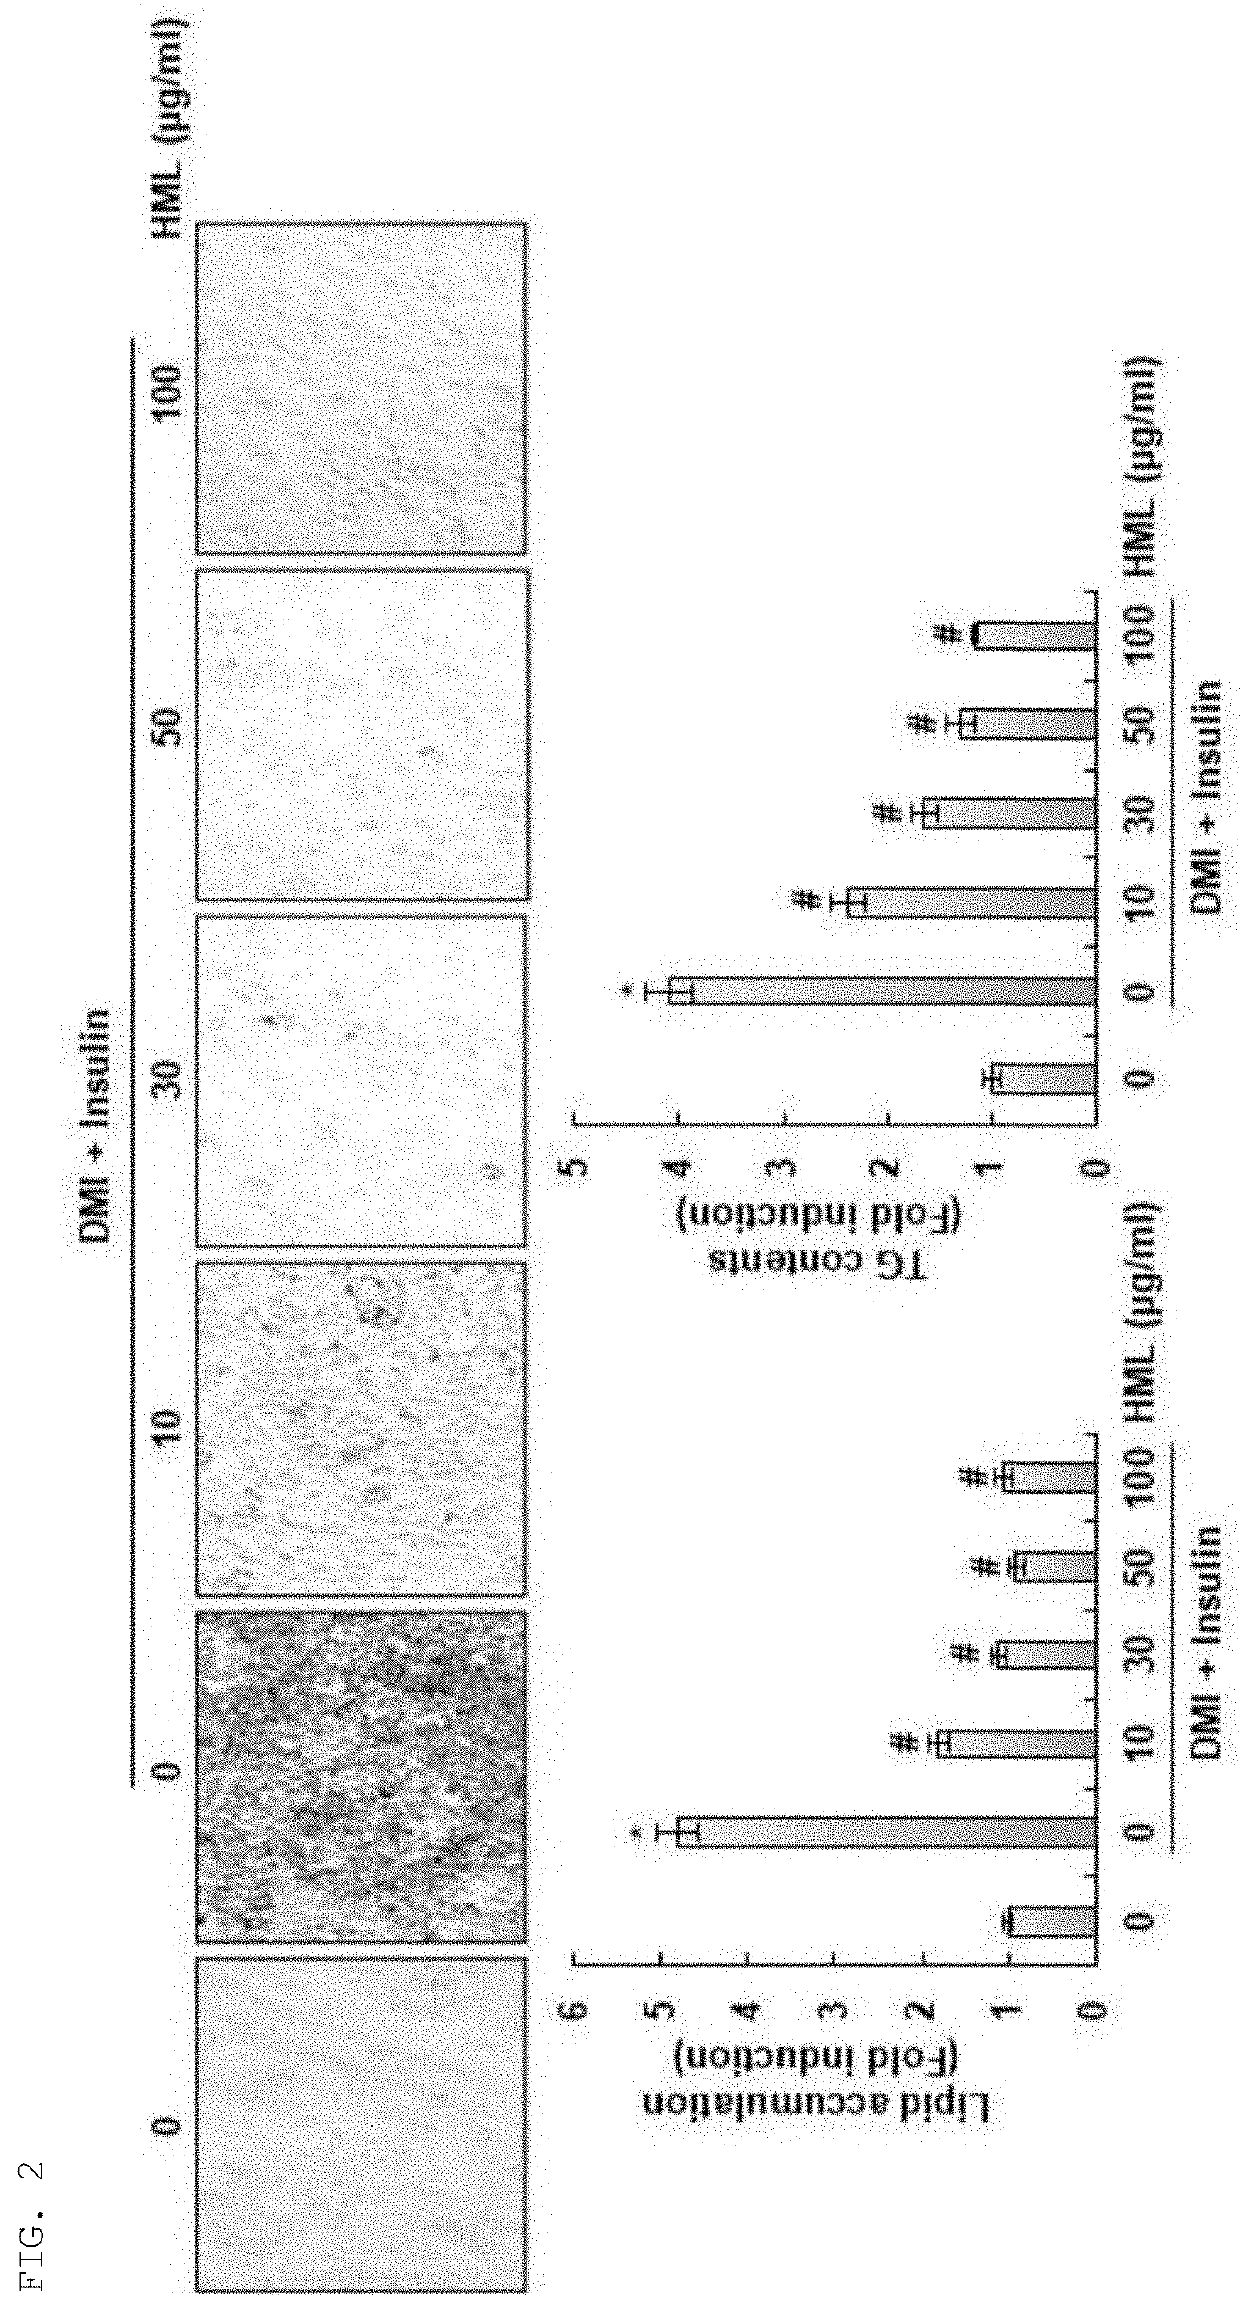 Anti-obesity composition including geumhwagyu extract as active ingredient